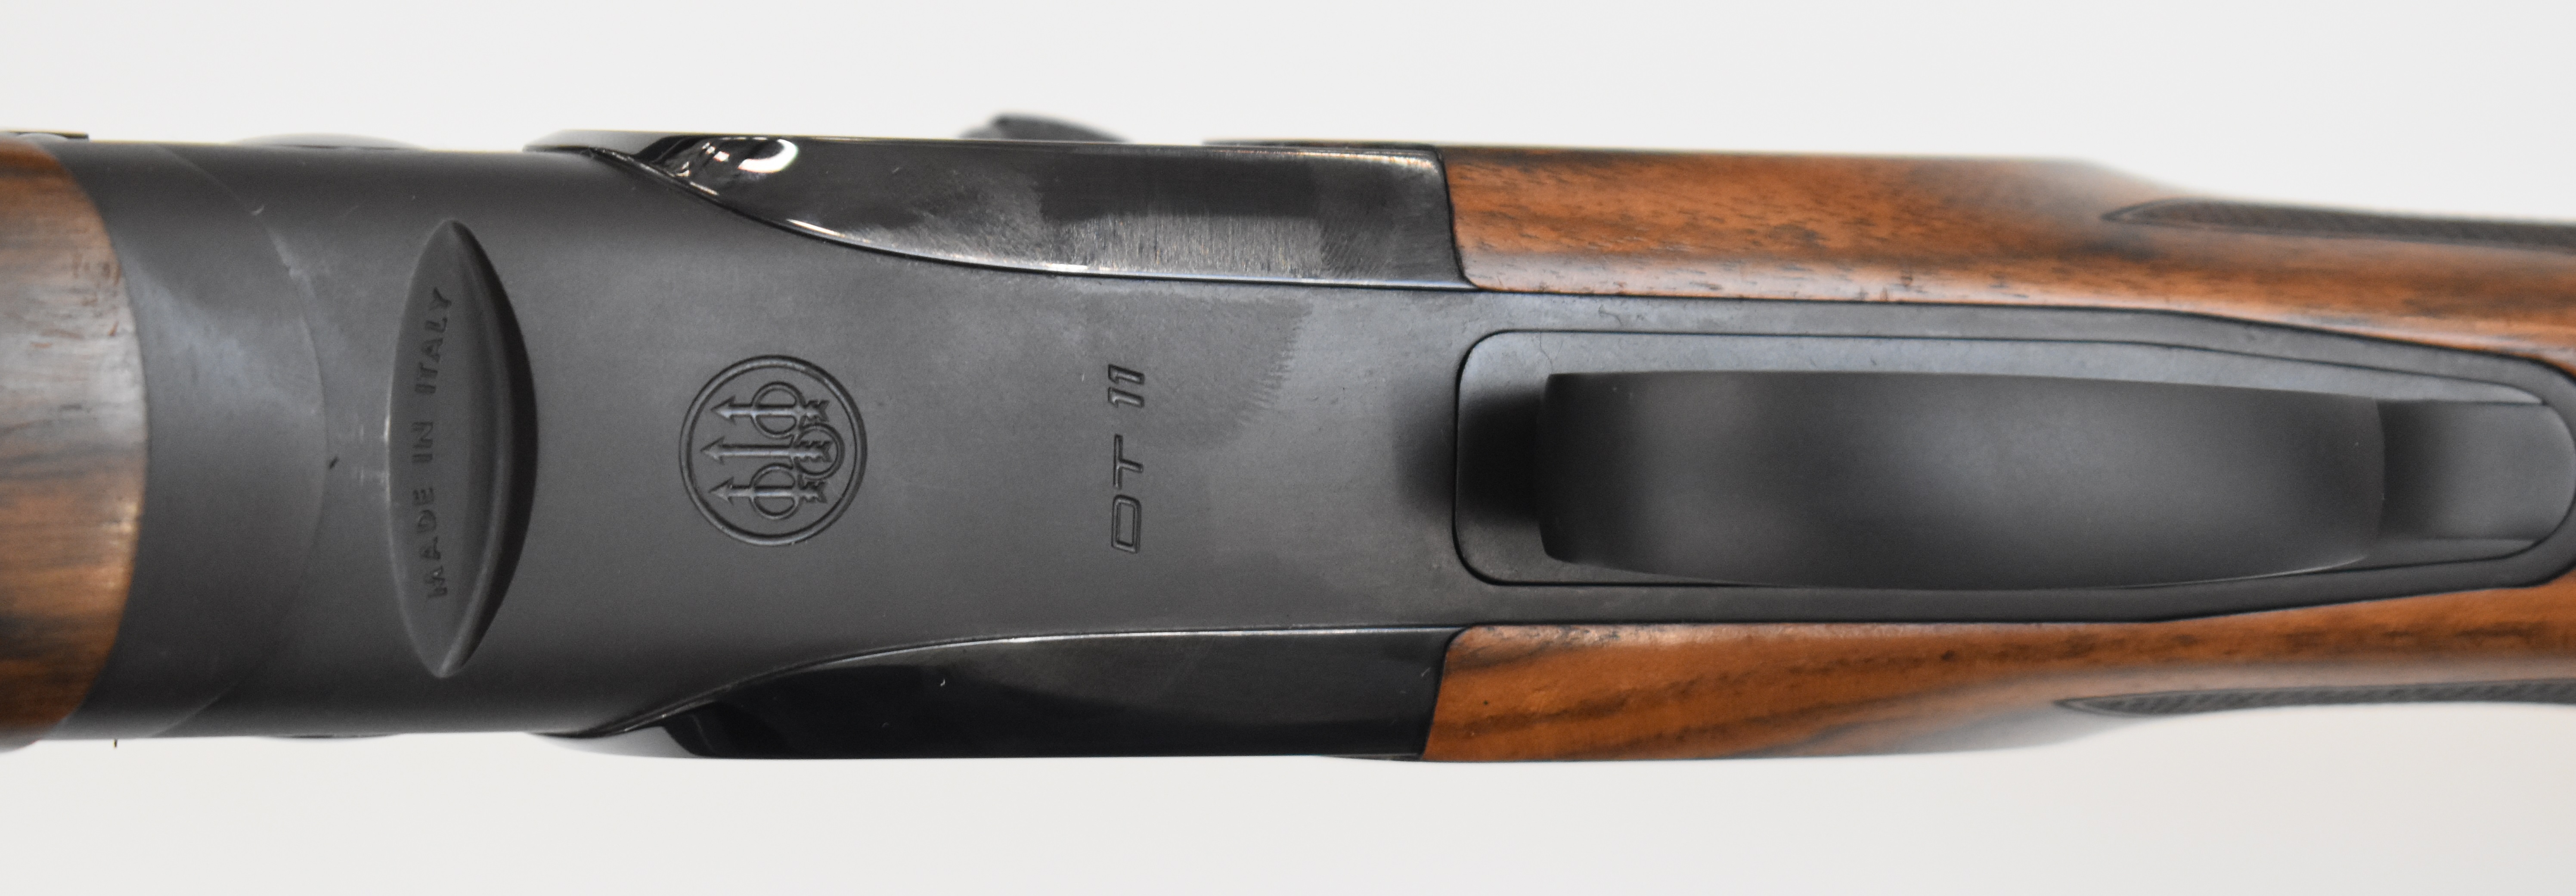 Beretta DT11 Sporting GMK 50th Anniversary Special Edition 12 bore over and under ejector shotgun - Image 11 of 13